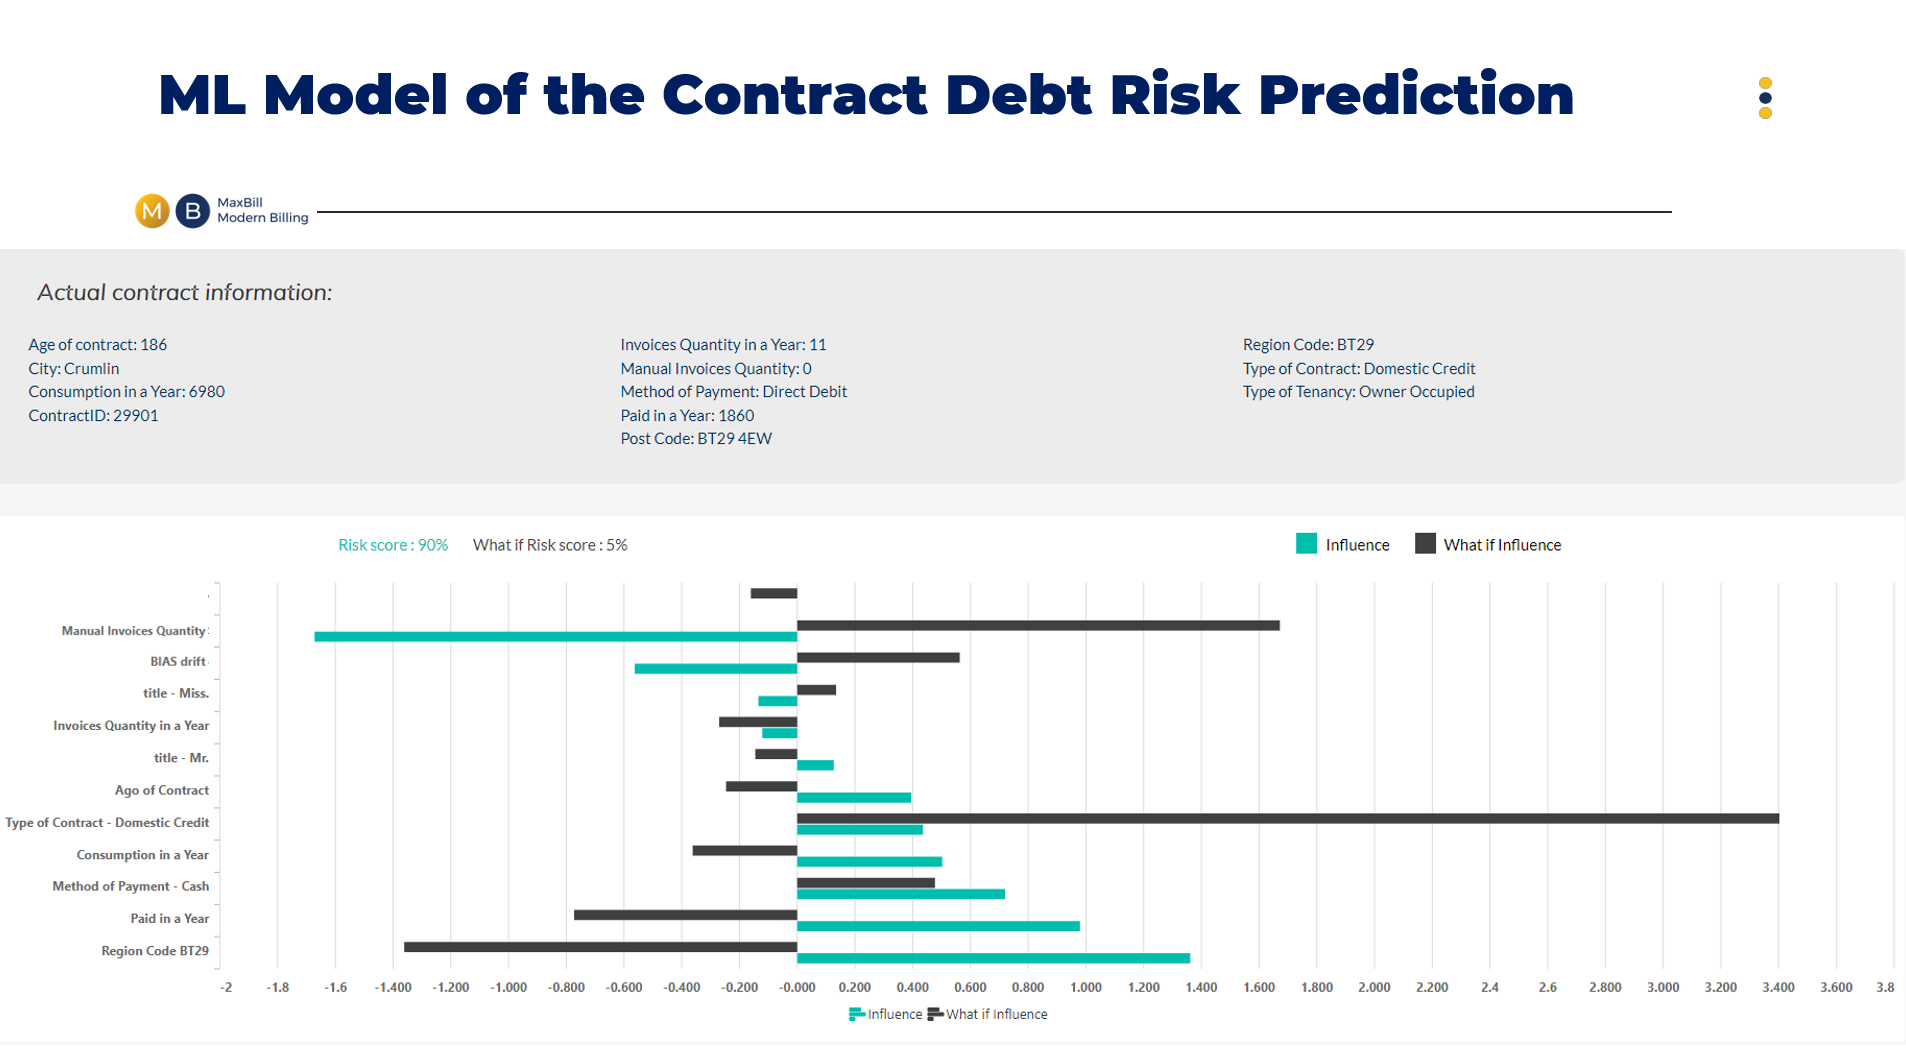 MaxBill Machine Learning Model of the Contract Debt Risk Prediction